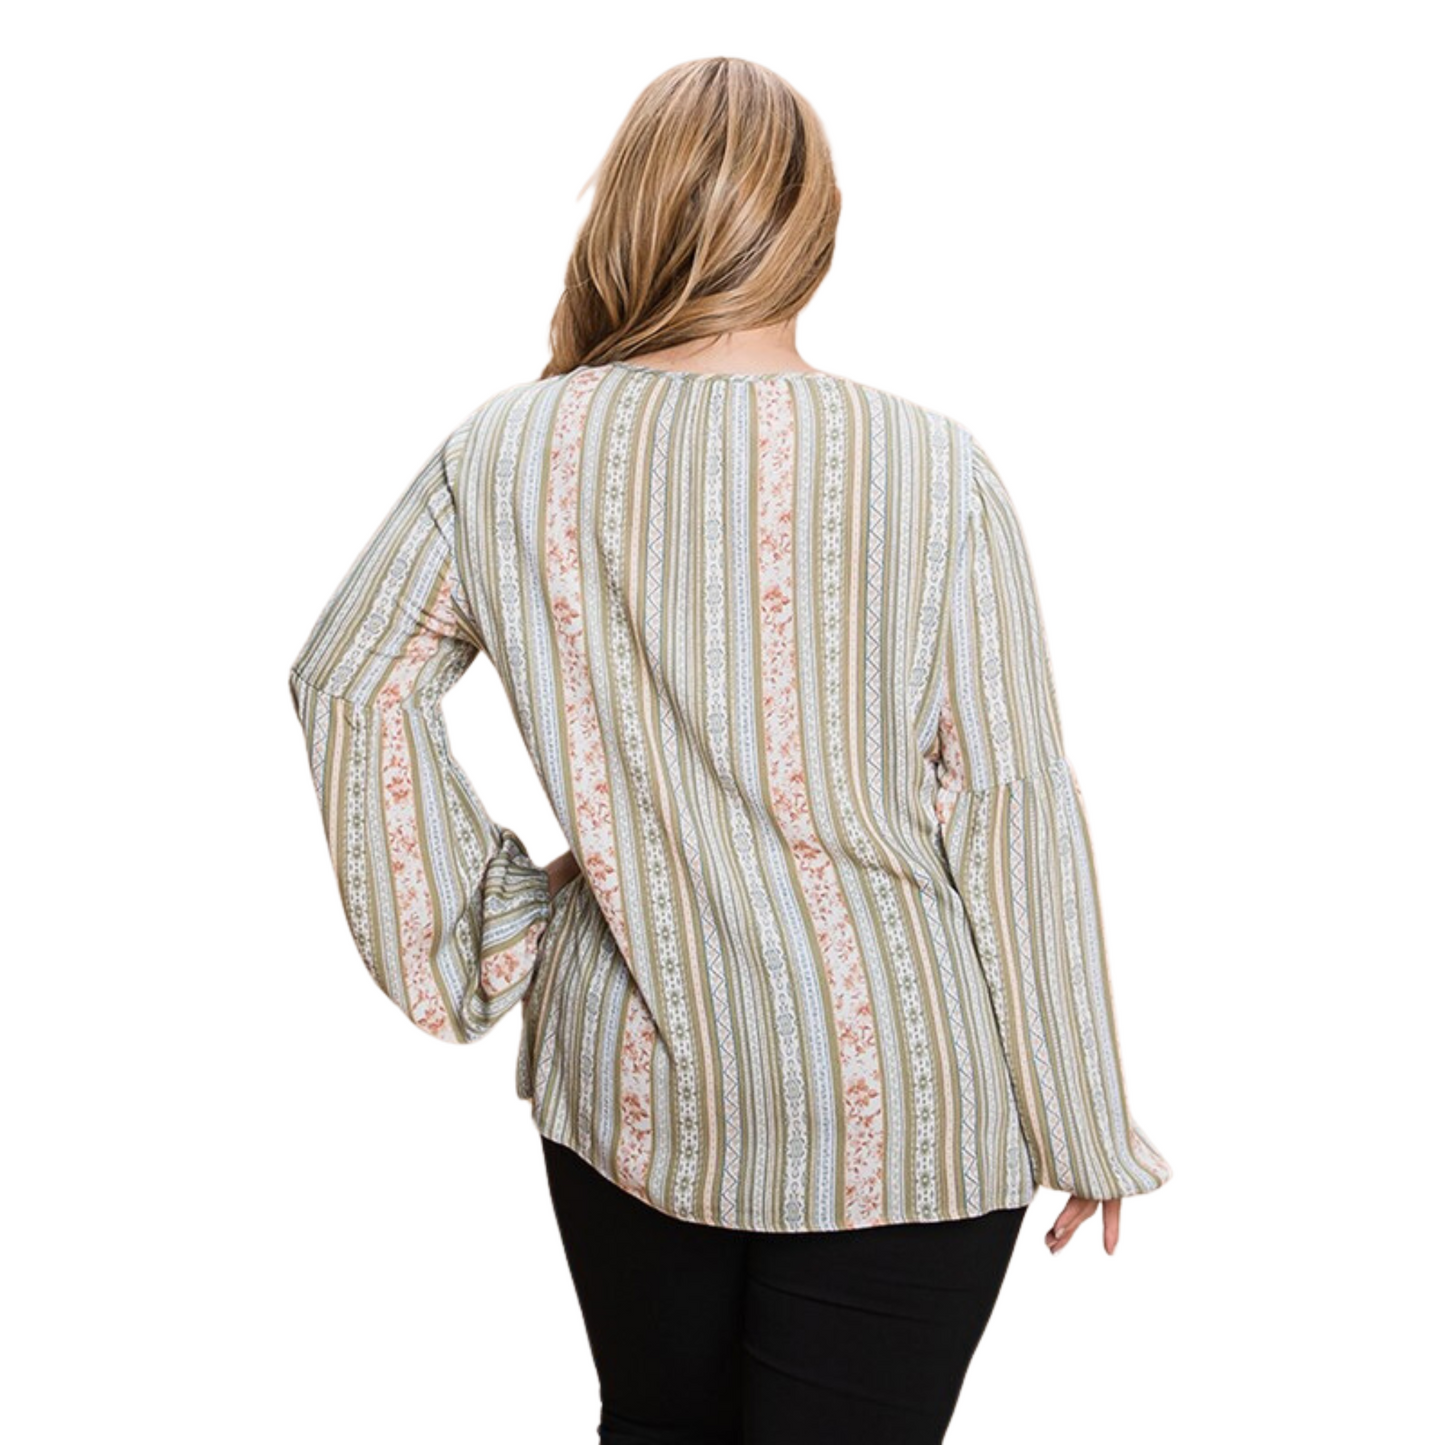 This Front Detail Long Sleeve Top is a must-have for plus size fashionistas. Featuring tie front detail, the top is complete with a vertical stripe pattern for a flattering, modern look. Style yours with jeans for a casual look, or switch it up with tailored pants for a dressier aesthetic.